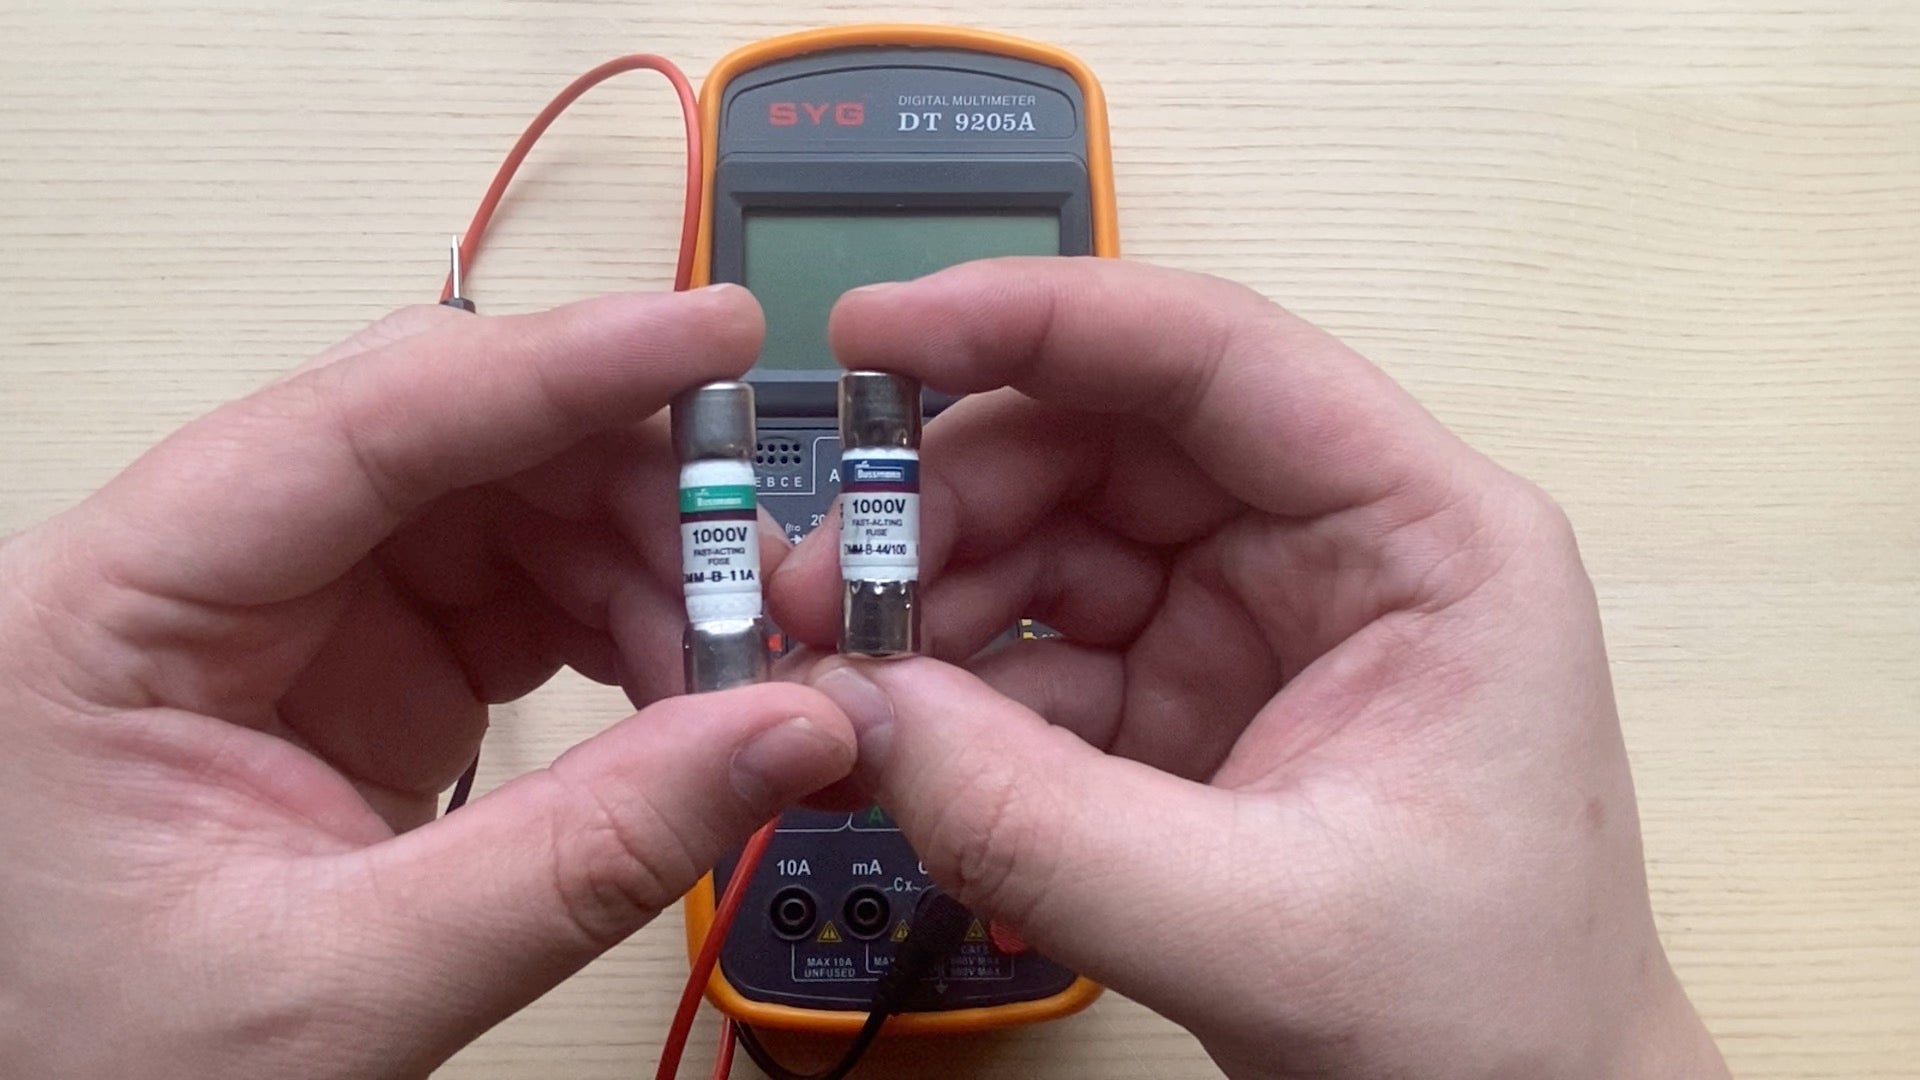 How to replace fuses in your Fluke digital multimeter